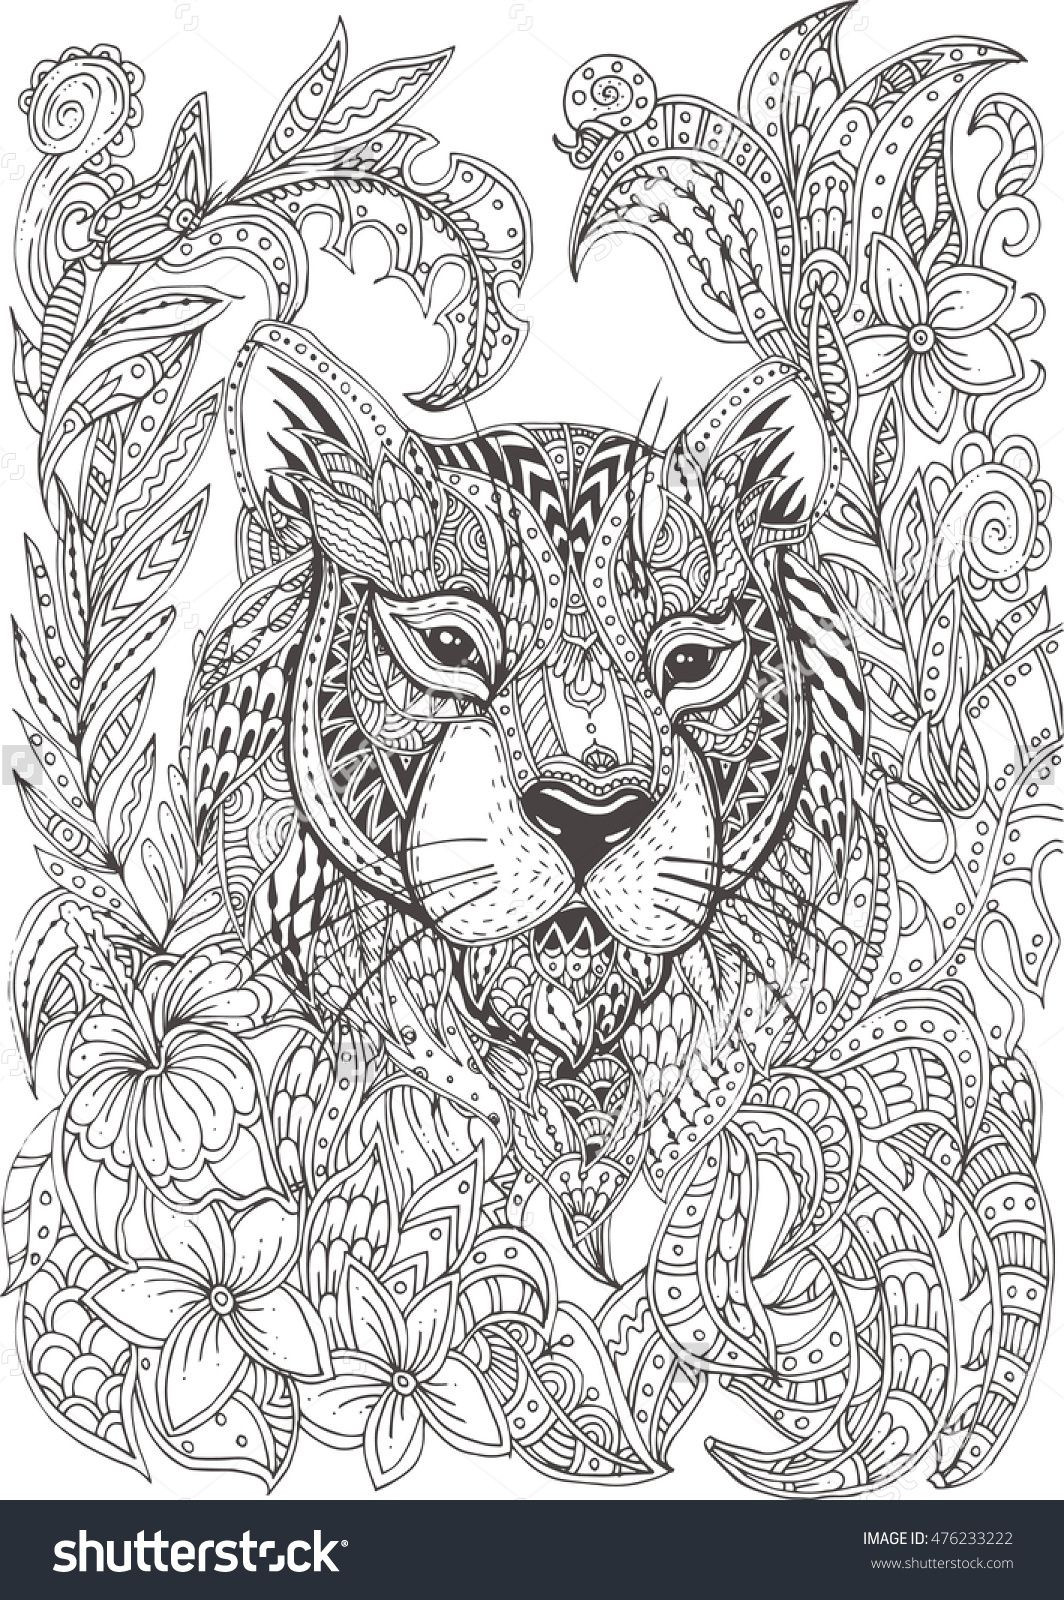 Adult Coloring Pages Animal Patterns
 Hand drawn tiger with ethnic floral doodle pattern Coloring page zendala